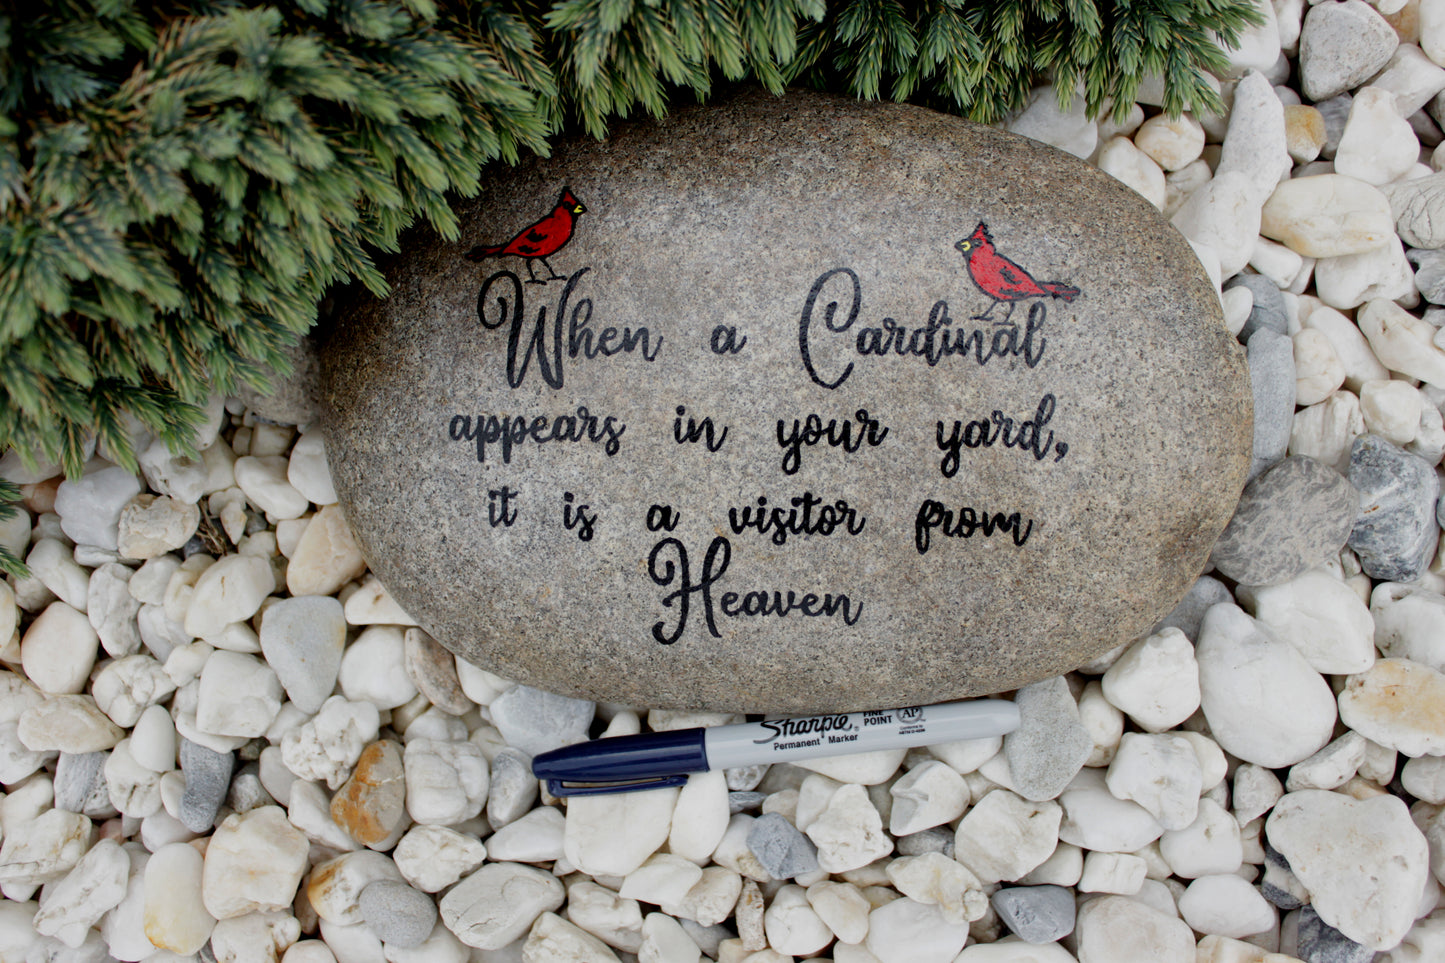 Large Memorial Garden Stone - Cardinal Visitor from Heaven